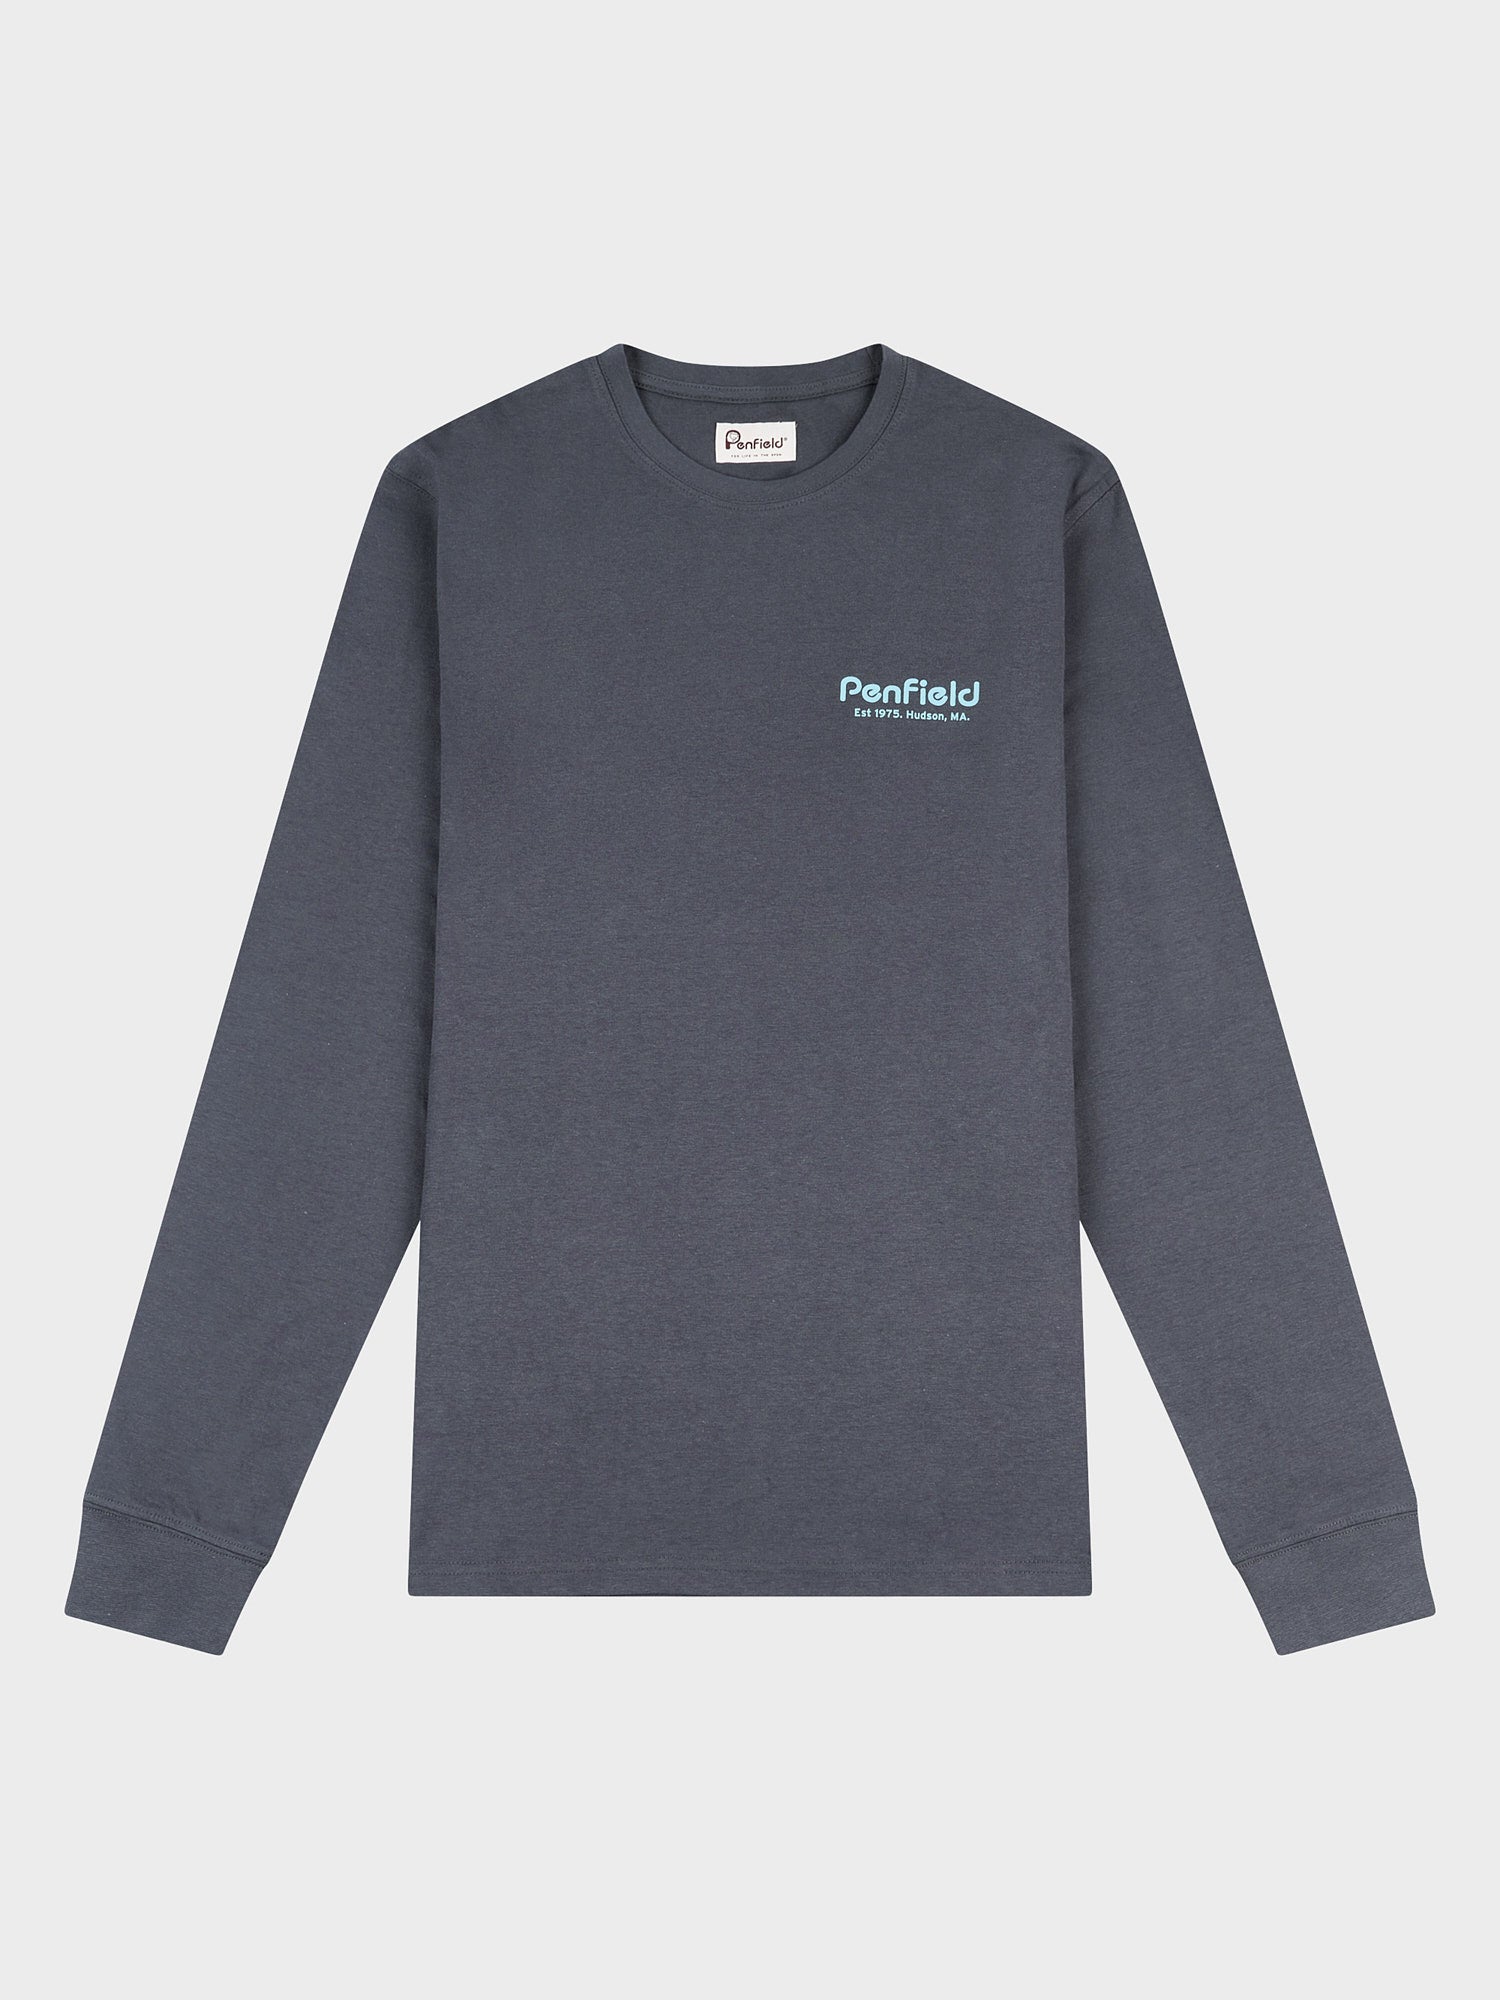 Sketch Mountain Back Graphic Long Sleeve T-Shirt in Ebony